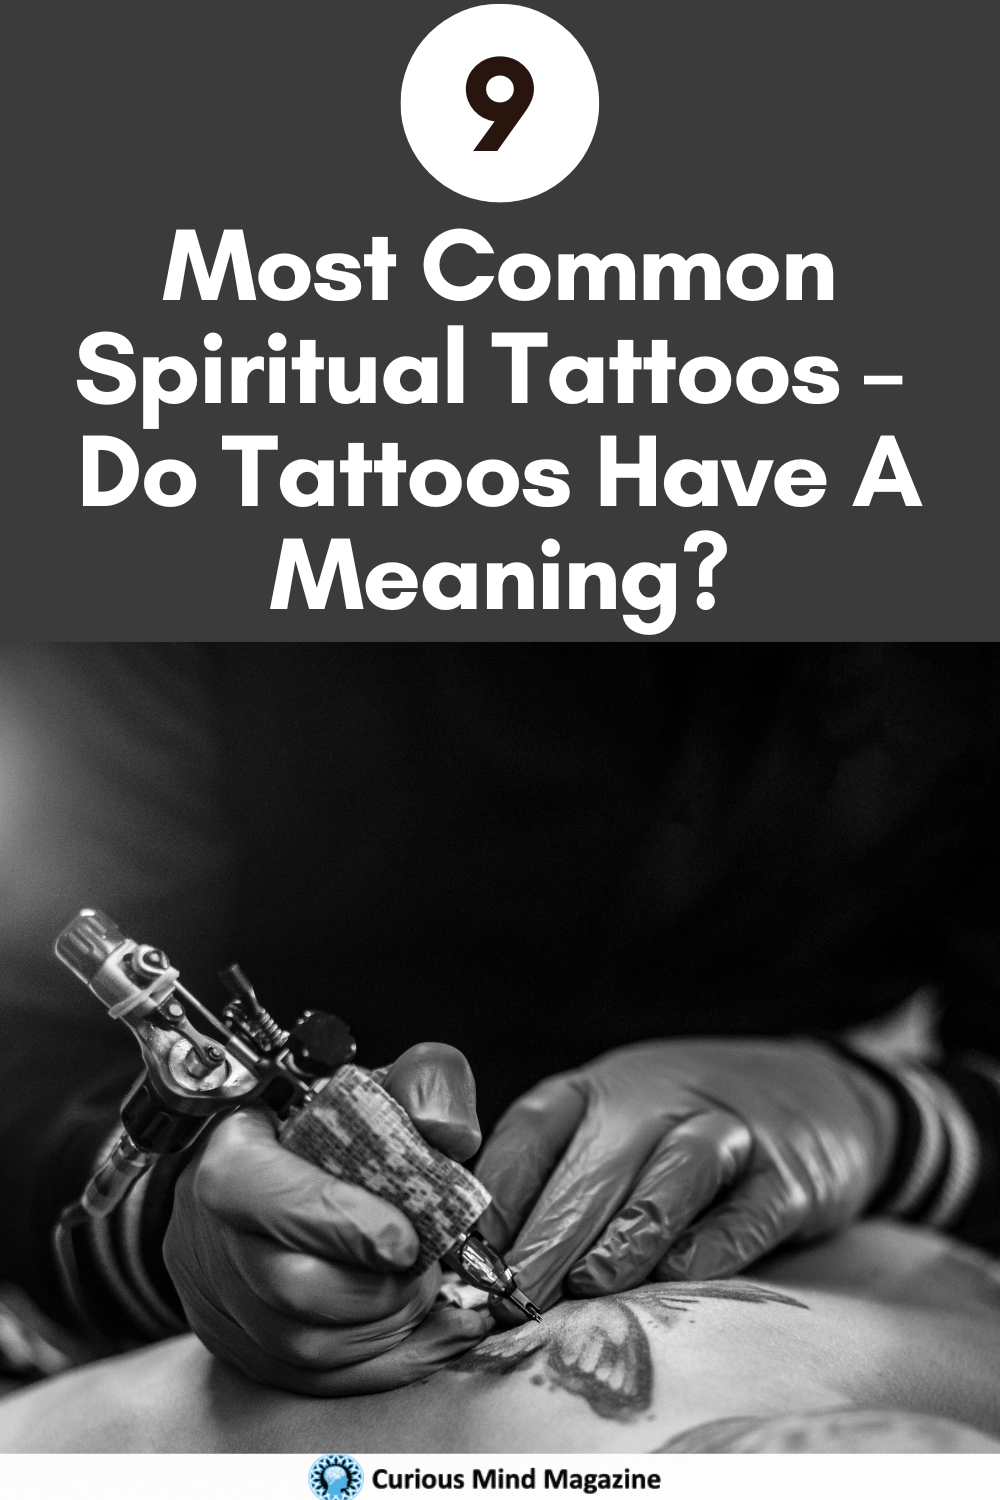 9 Most Common Spiritual Tattoos - Do Tattoos Have A Meaning?